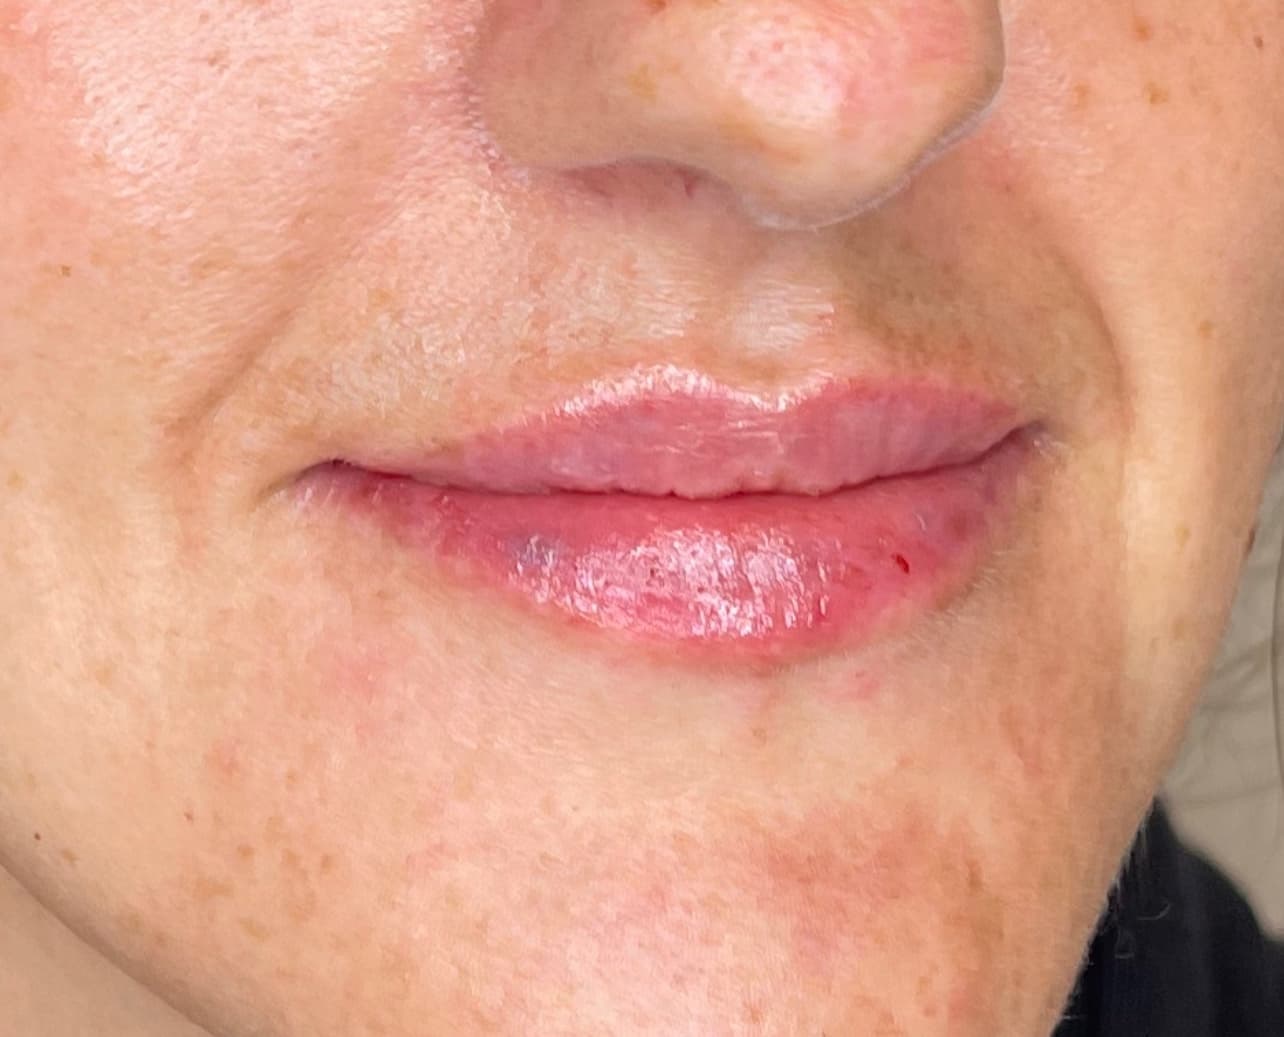 Lip filler result by Dr Kara Cosmetic Clinic in Norwich, Norfolk, UK